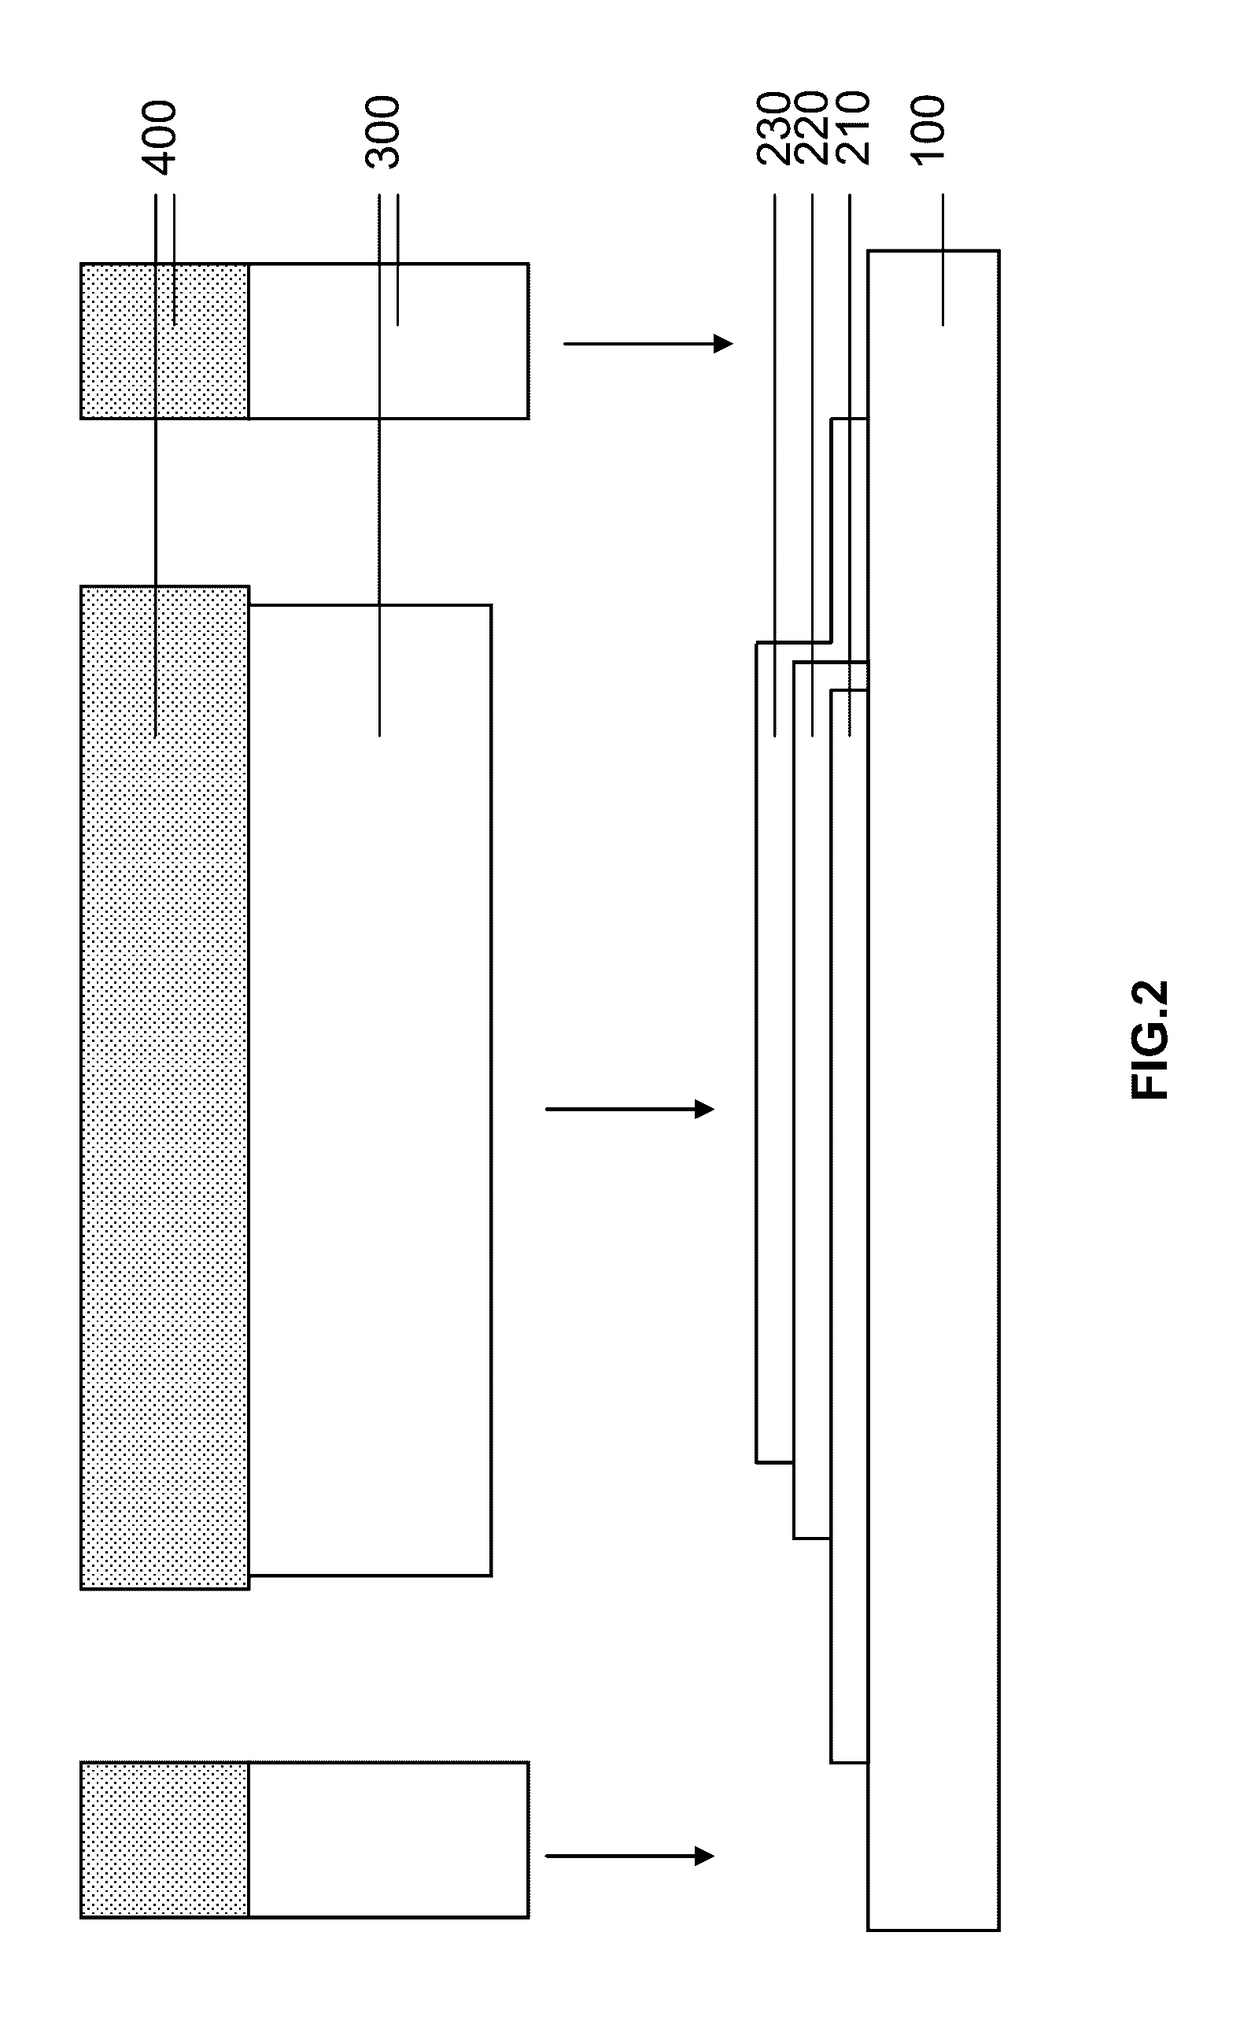 Electrical connection of an OLED device